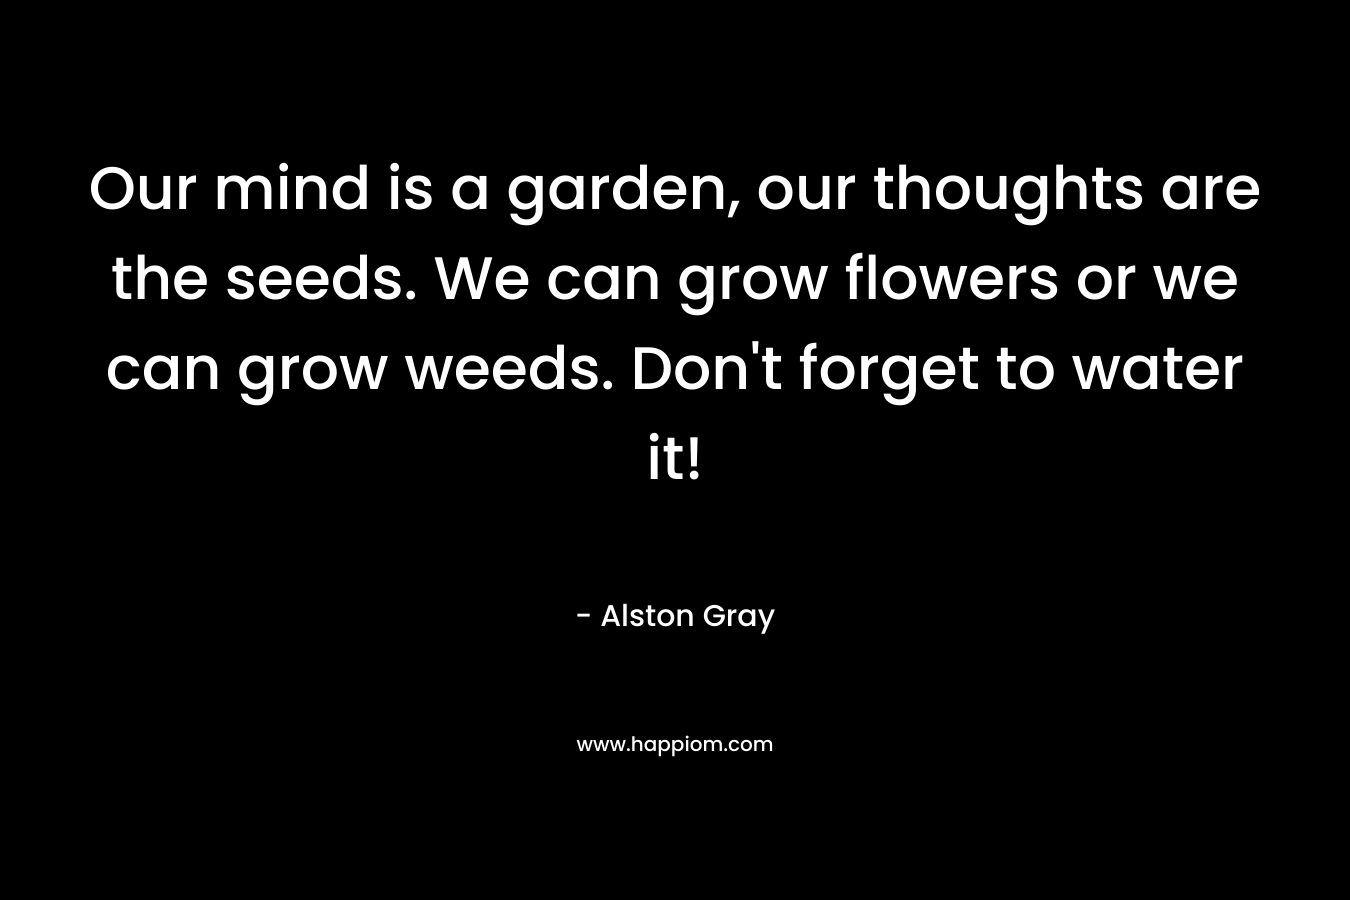 Our mind is a garden, our thoughts are the seeds. We can grow flowers or we can grow weeds. Don’t forget to water it! – Alston Gray